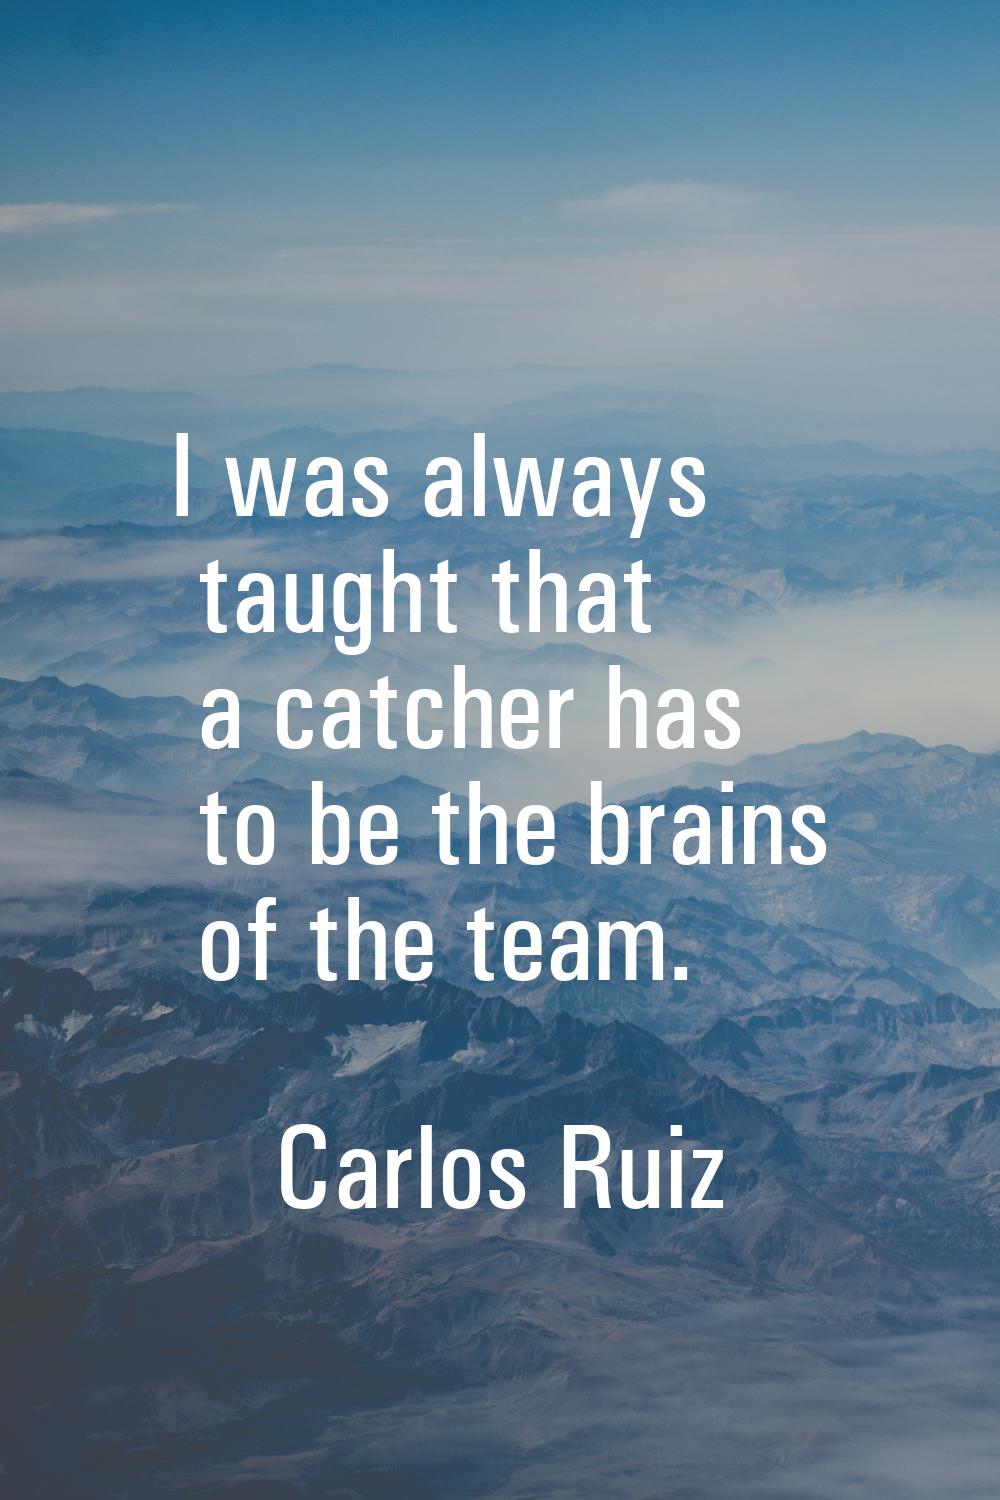 I was always taught that a catcher has to be the brains of the team.